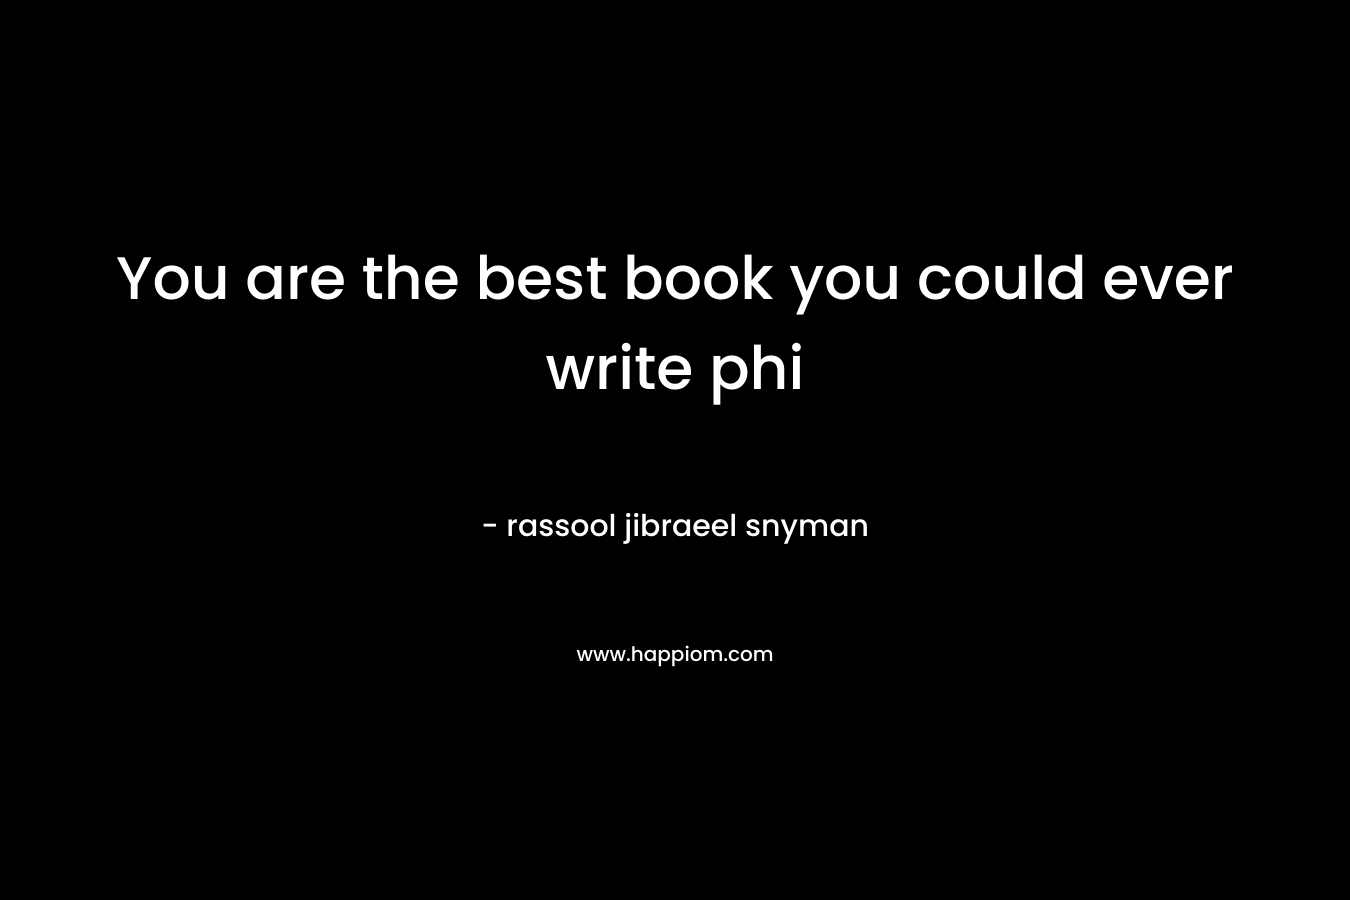 You are the best book you could ever write phi